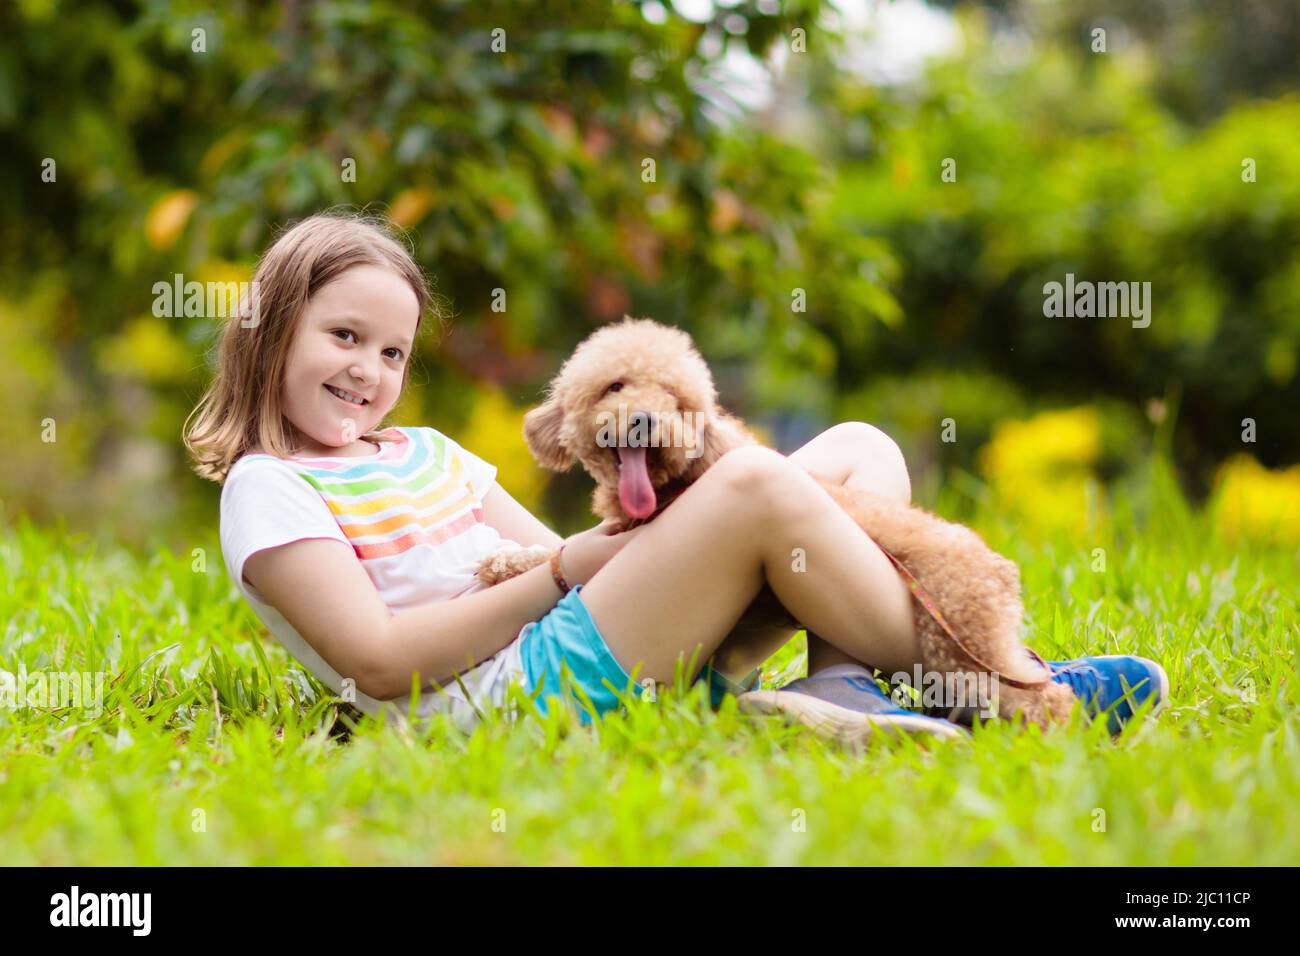 Kids play with cute little puppy. Children and baby dogs playing in sunny summer garden. Little girl holding puppies. Child with pet dog. Stock Photo